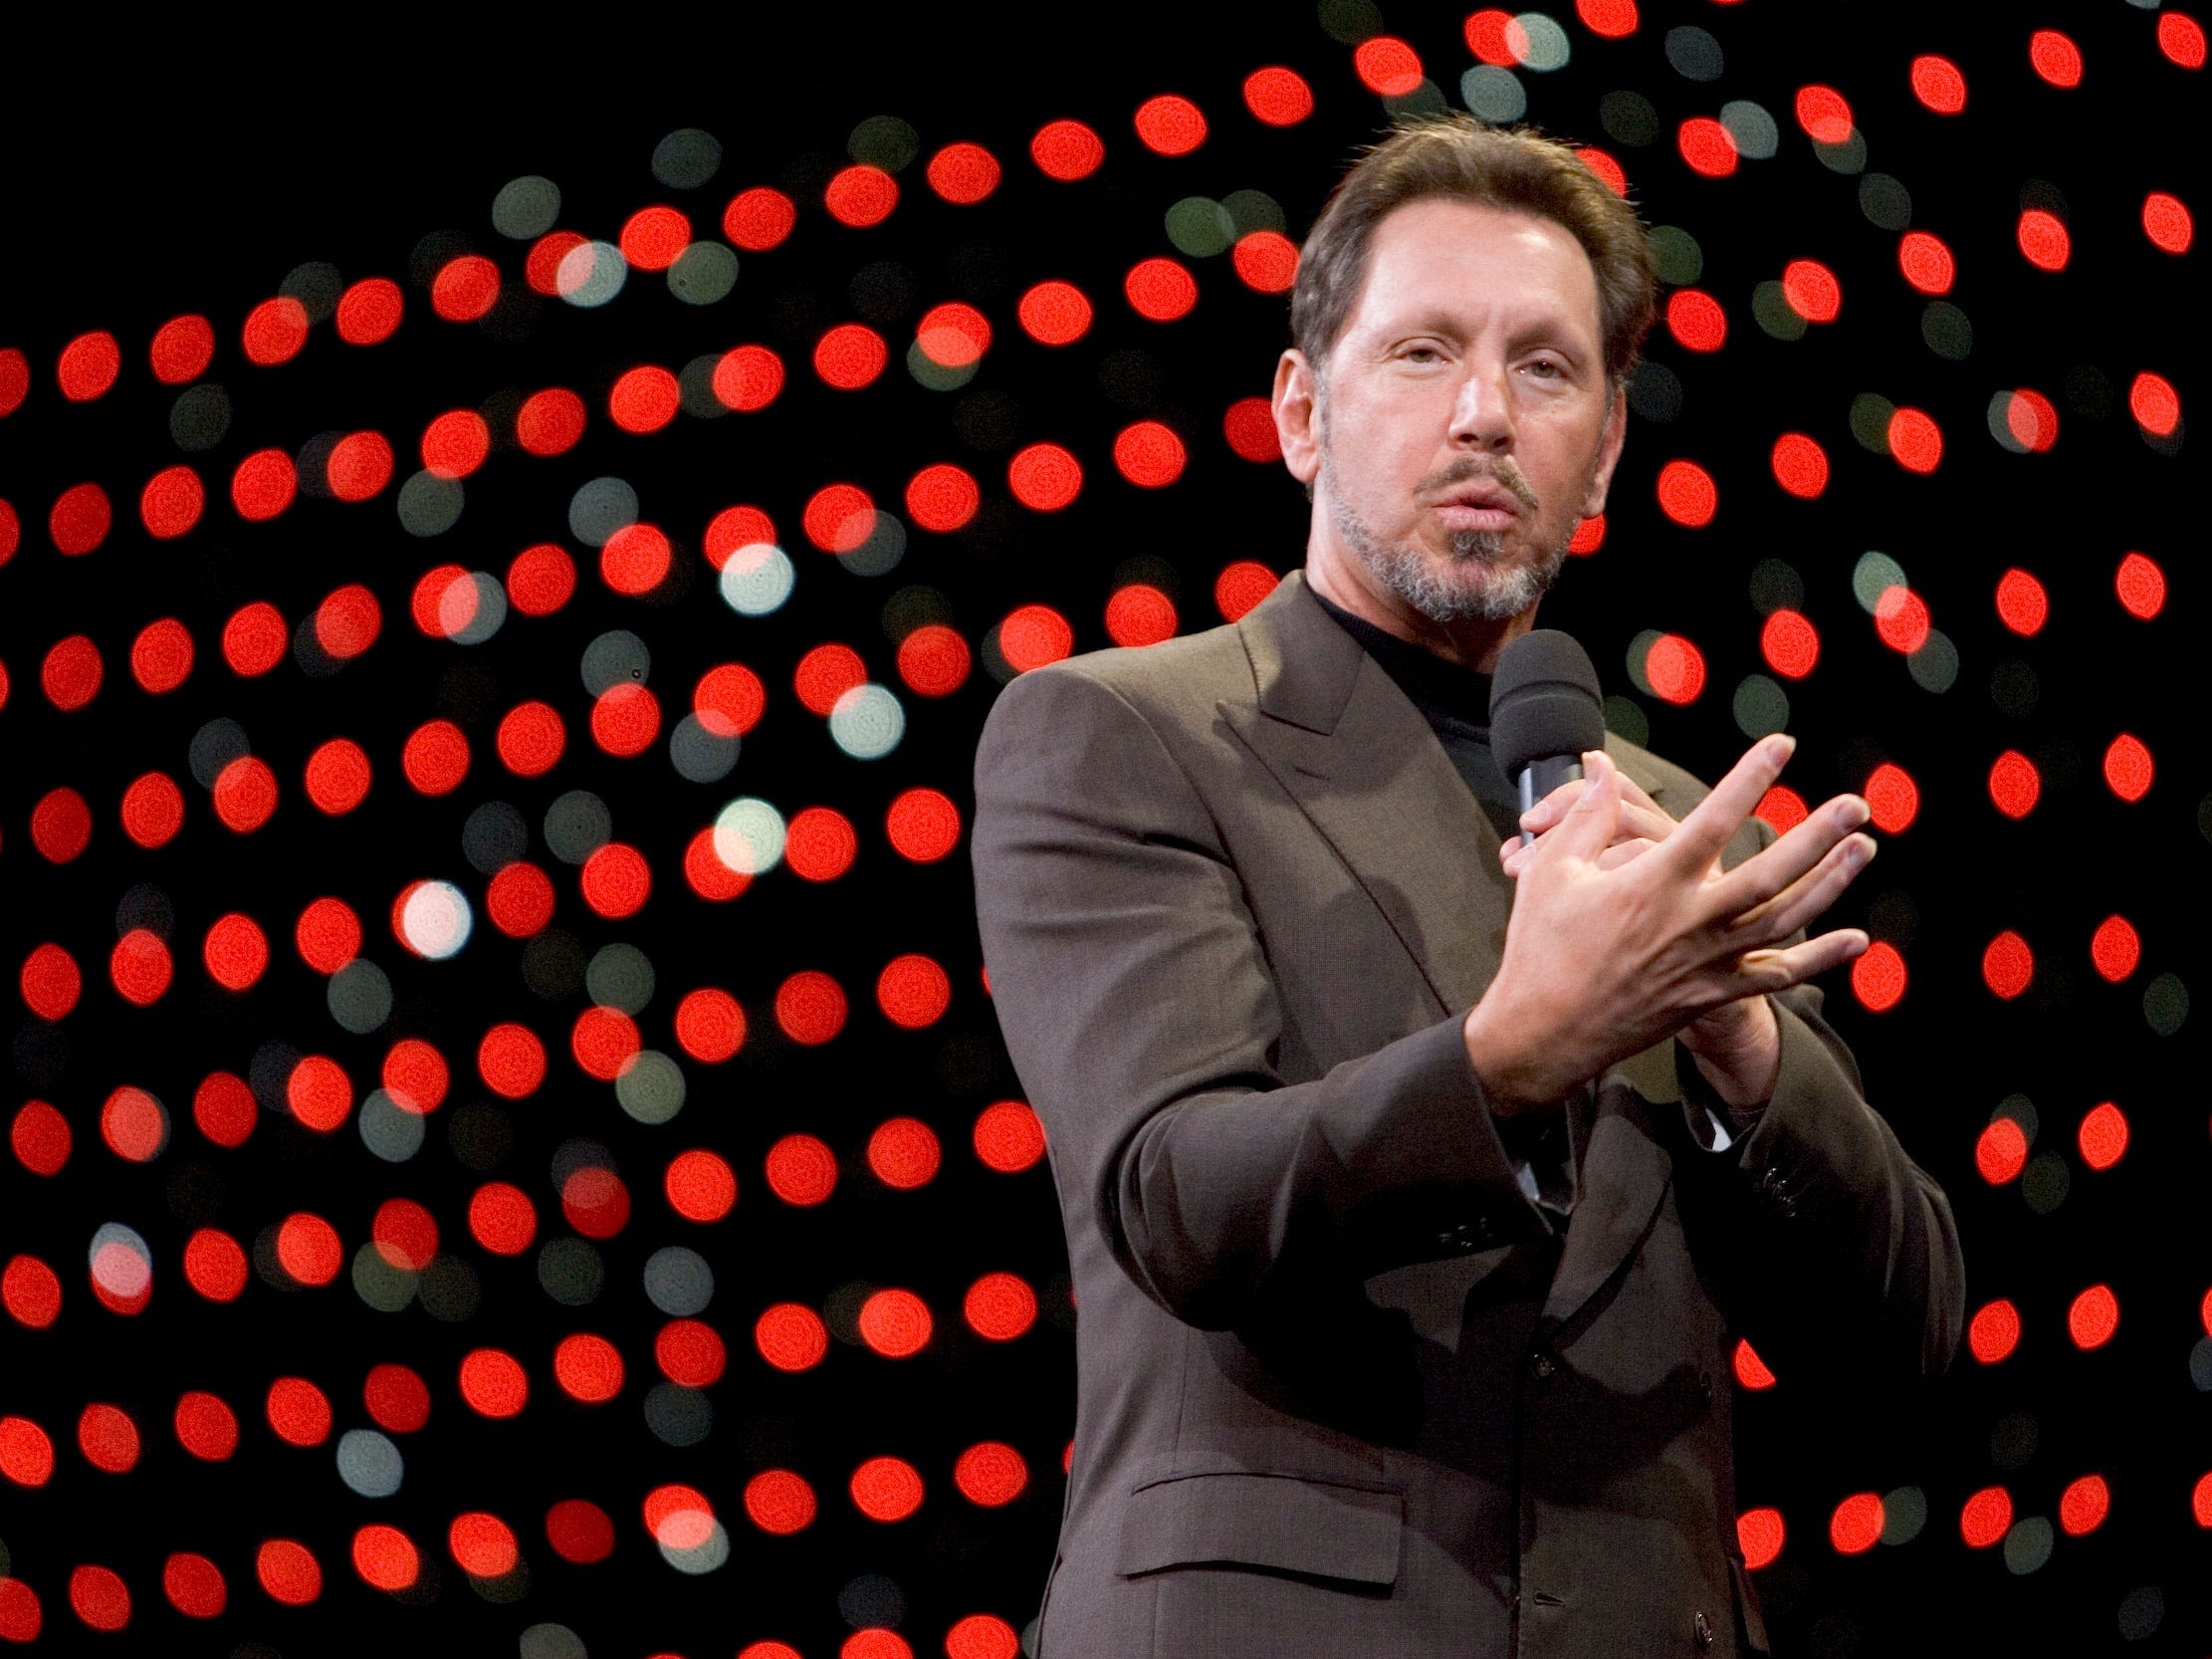 The life and career of Larry Ellison, Oracle's CTO and cofounder, who went from college dropout to the world's 7th richest person